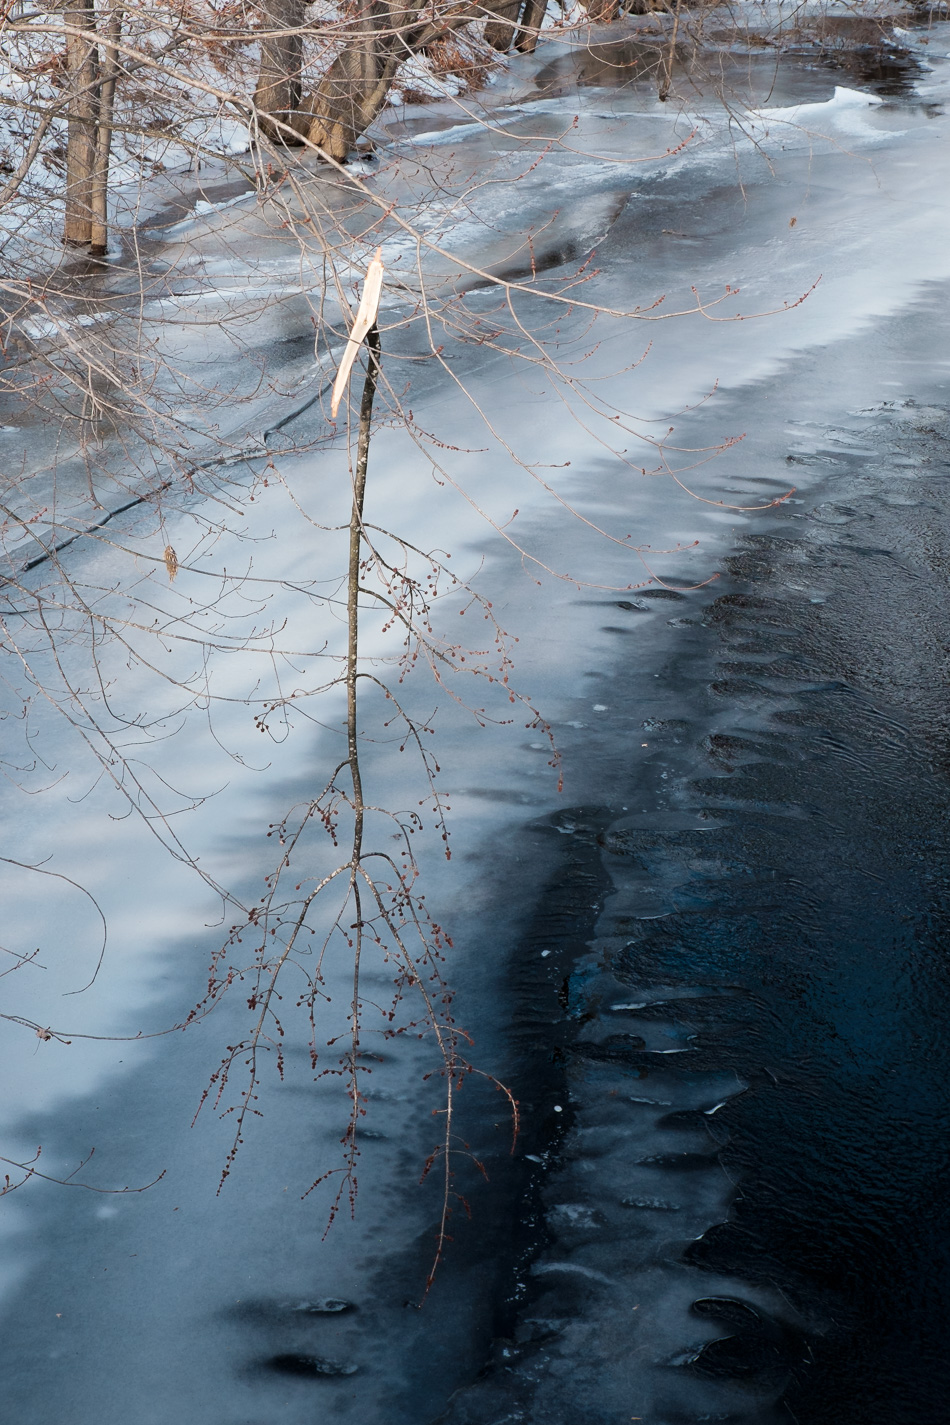 Color photo of a broken tree branch hanging from another over a partially frozen river